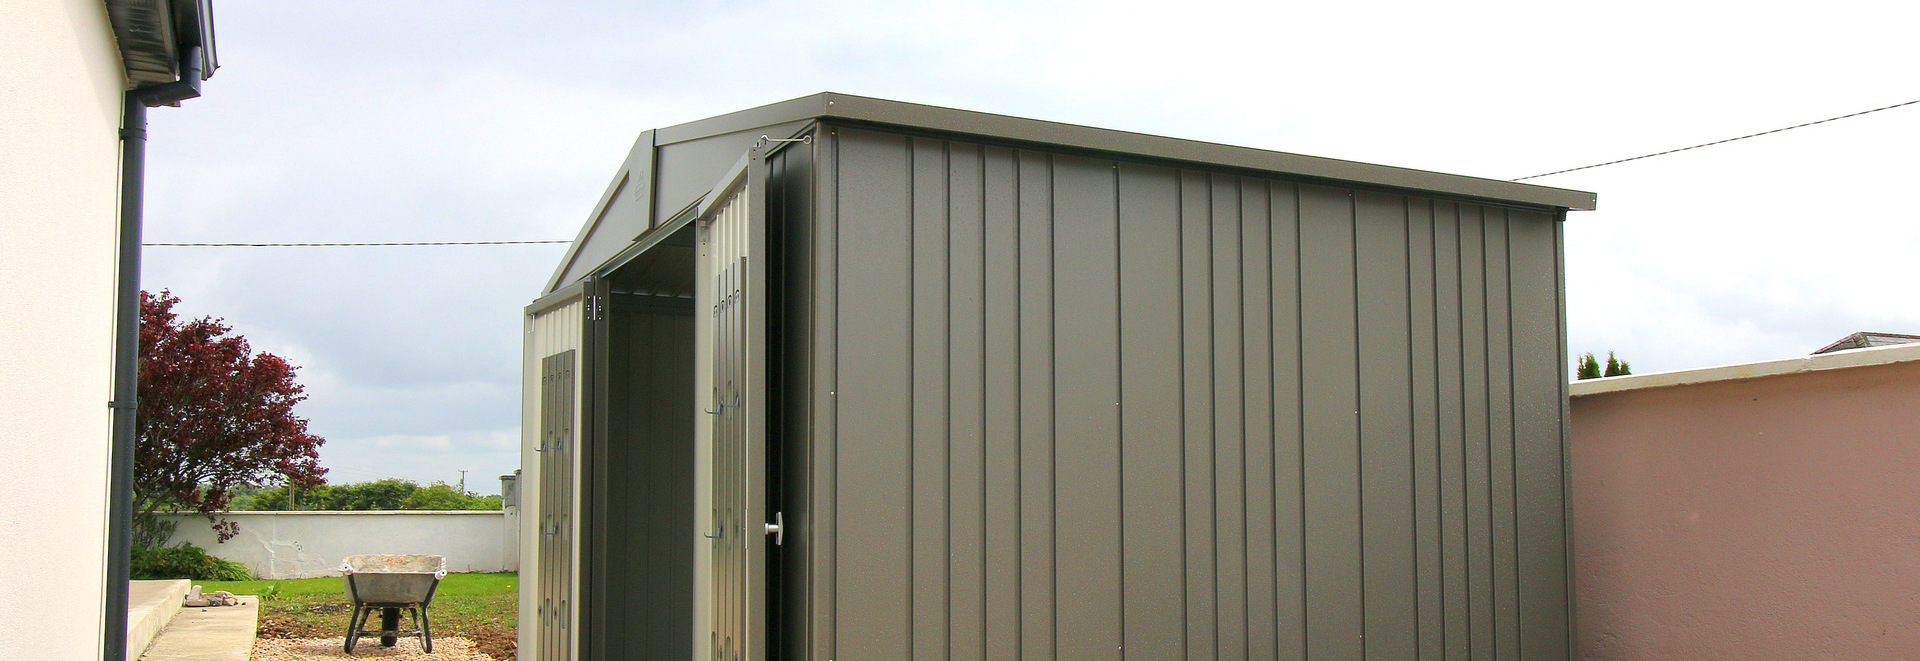 Biohort Europa Size 5 Garden Shed, in metallic quartz grey, supplied + fitted in Athlone, Co Westmeath by Owen Chubb Landscapers